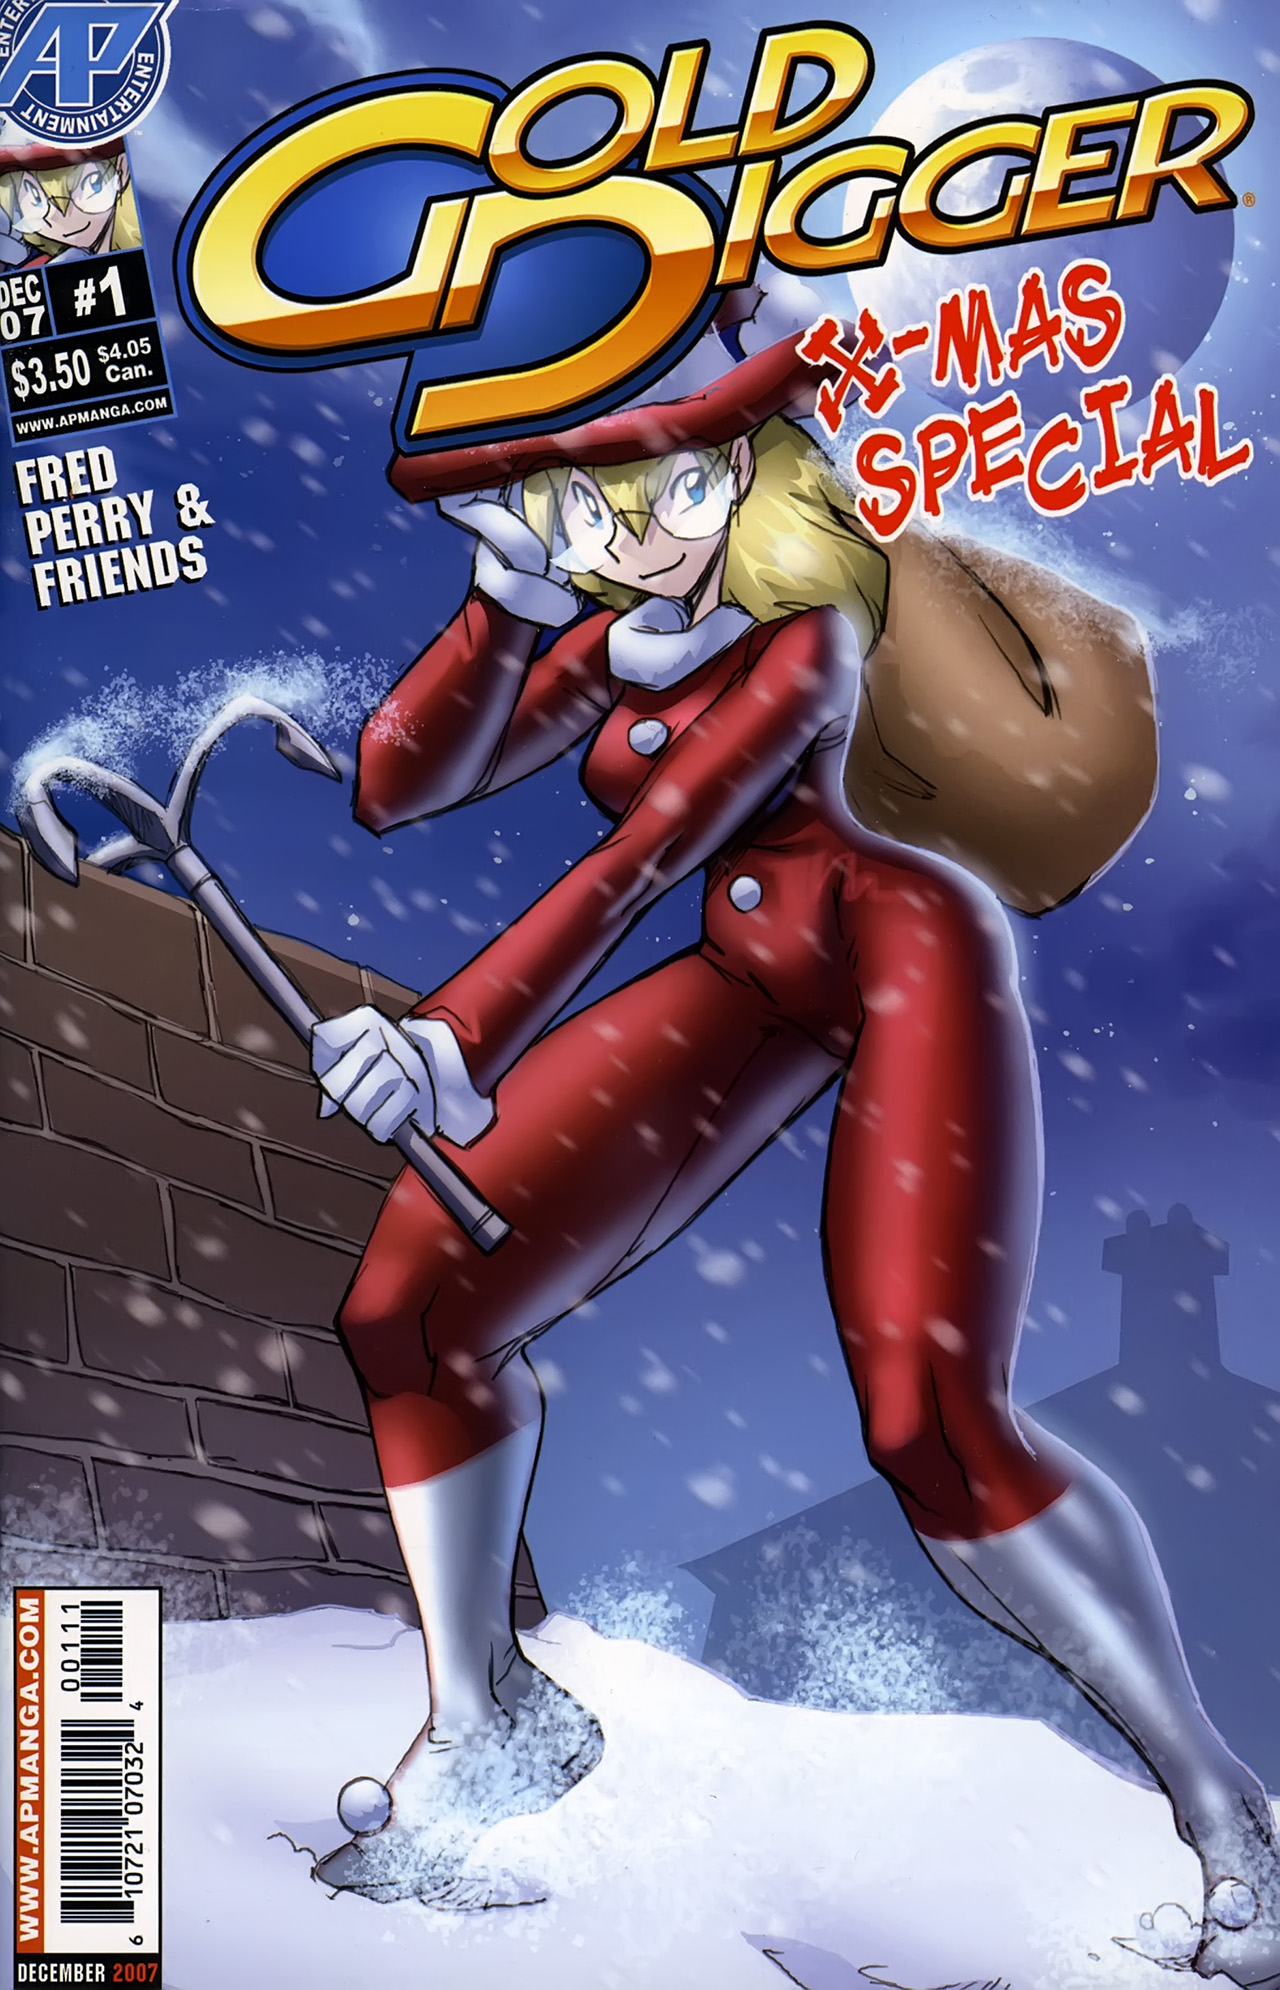 Read online Gold Digger X-Mas Special comic -  Issue #1 - 1